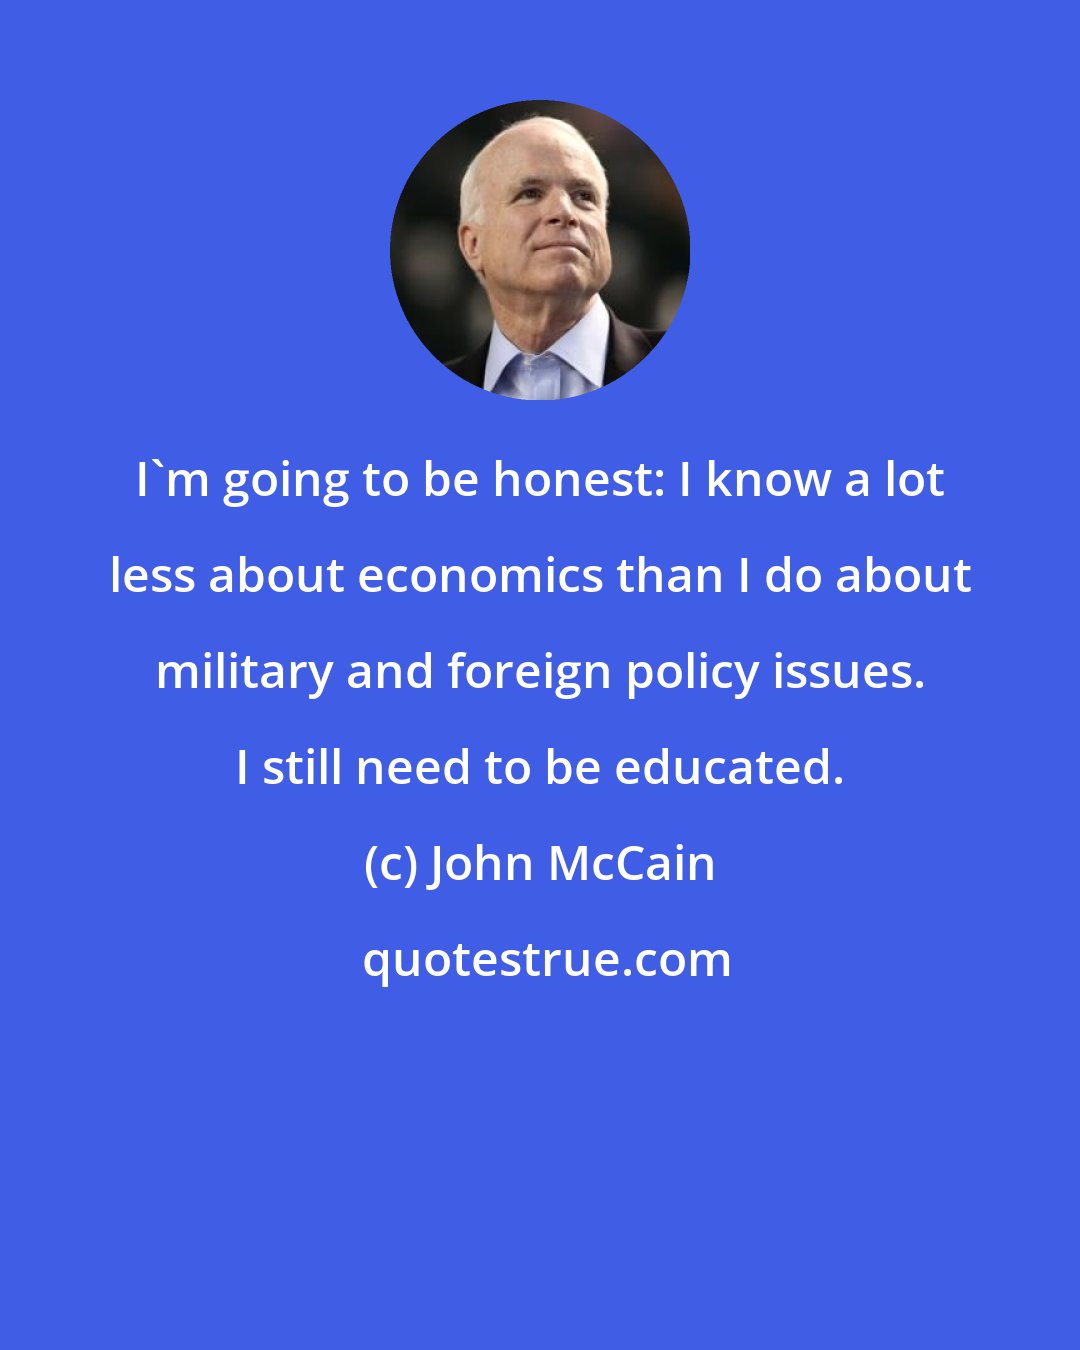 John McCain: I'm going to be honest: I know a lot less about economics than I do about military and foreign policy issues. I still need to be educated.